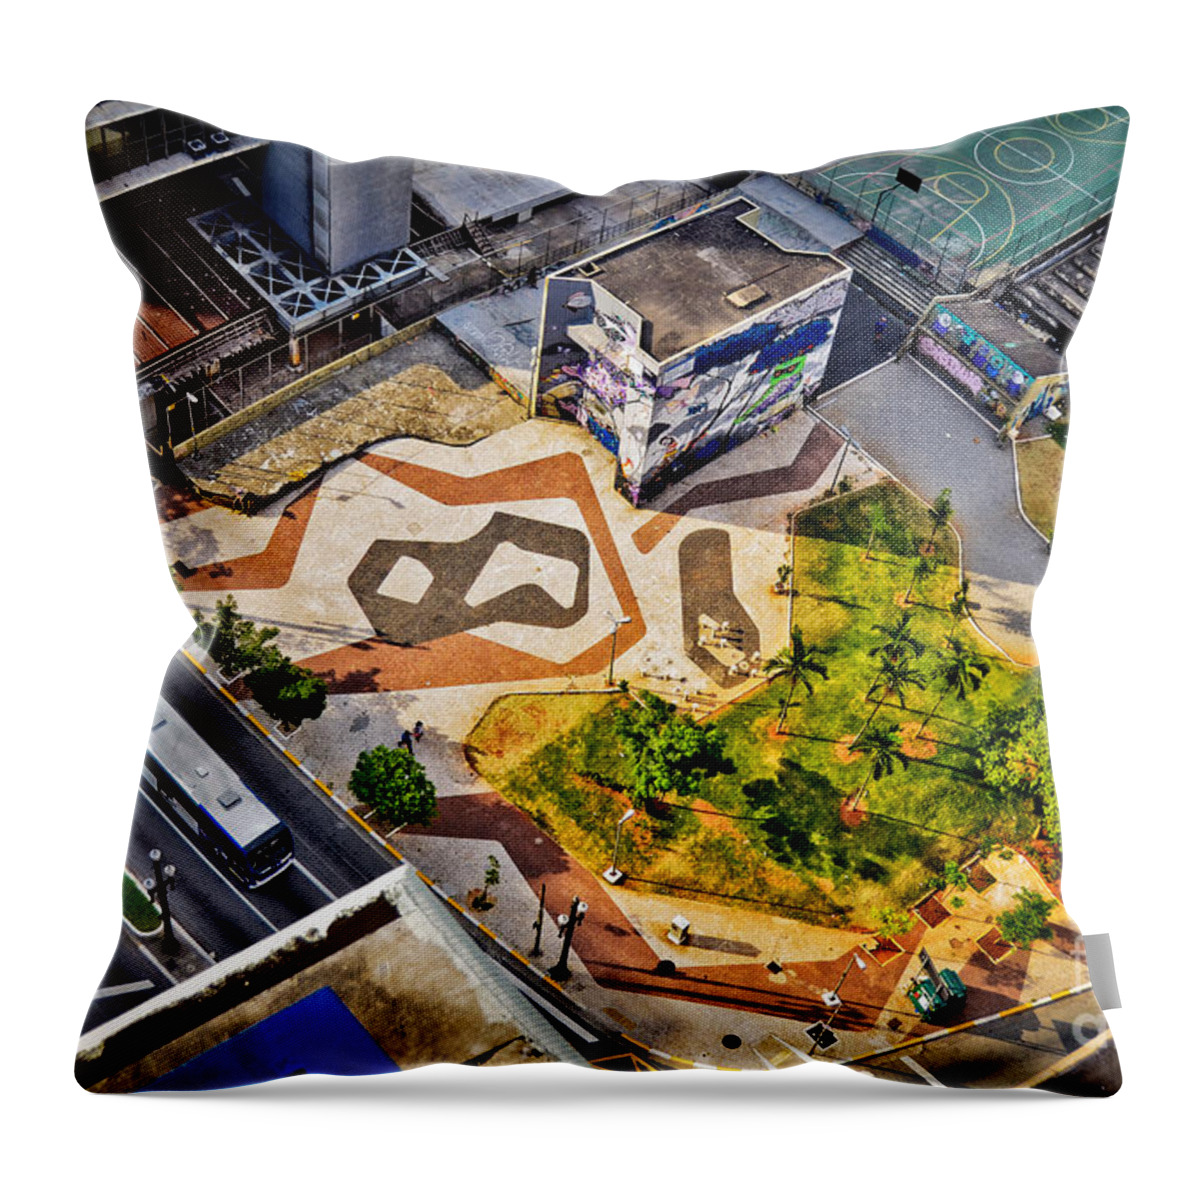 Geometria Throw Pillow featuring the photograph Sao Paulo Downtown - Geometry of Public Spaces by Carlos Alkmin